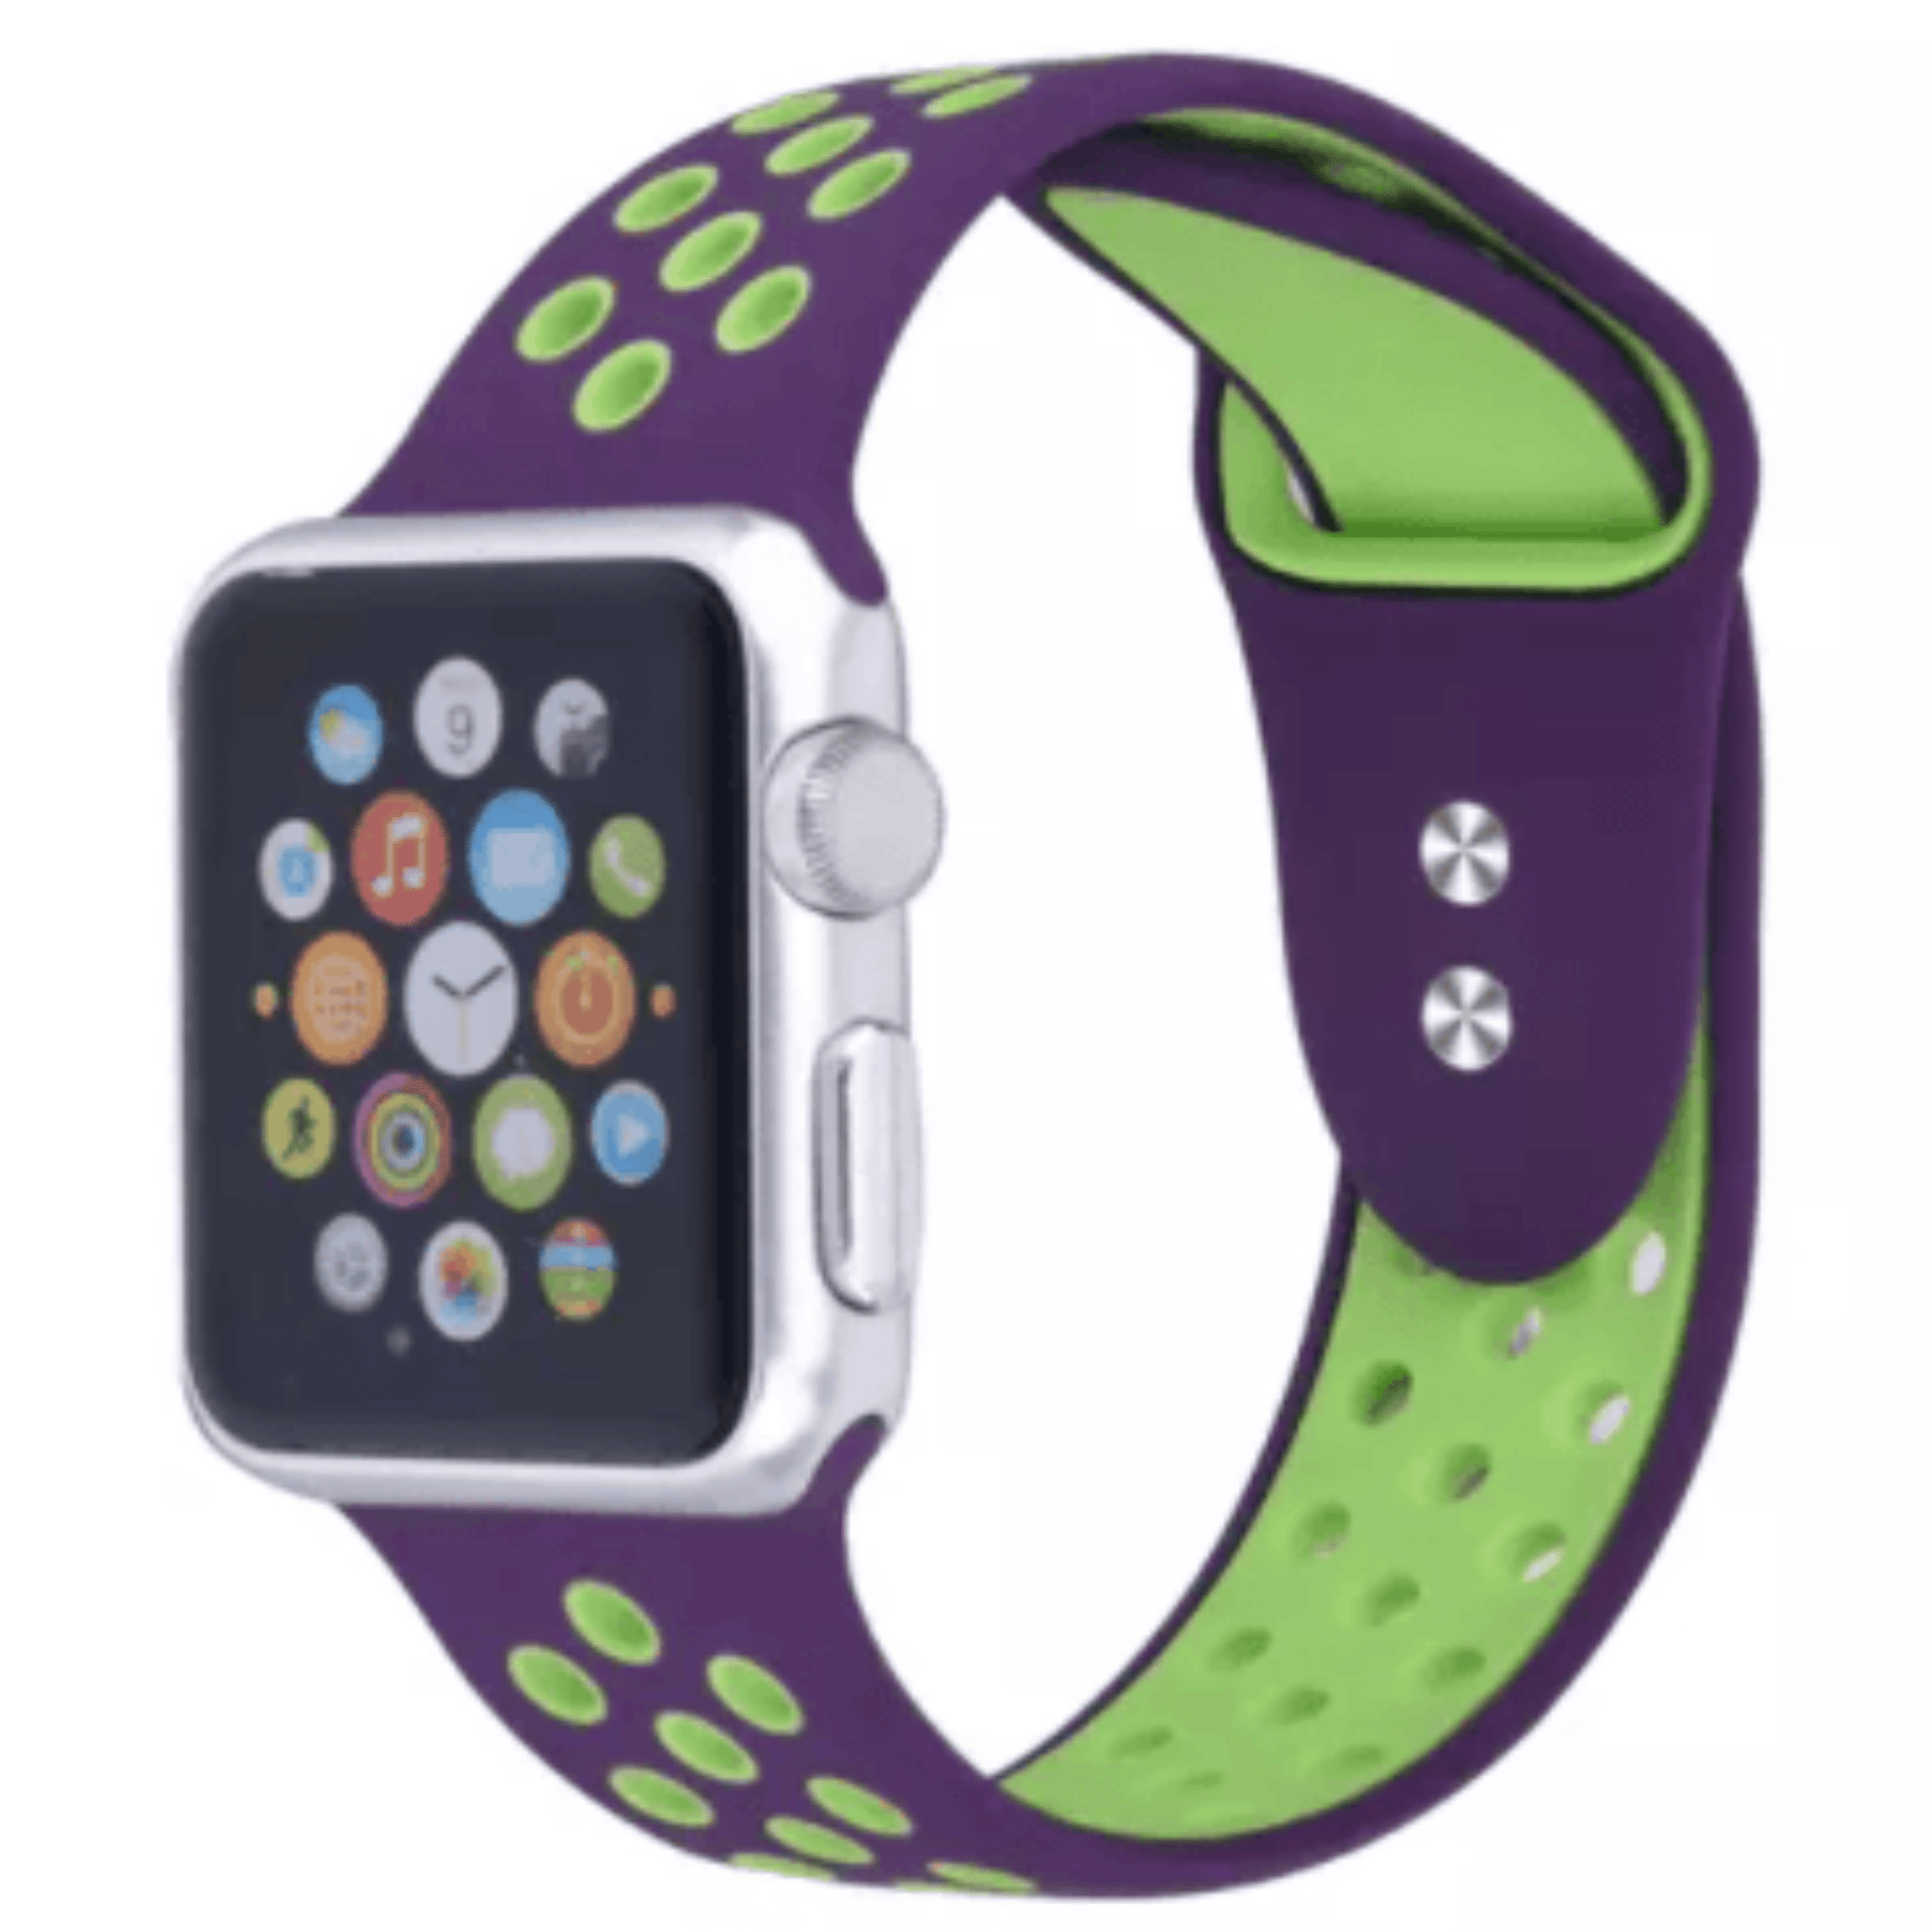 Breathable Silicone Sport Replacement Band for Apple Watch Purple Green Apple Watch Band Elements Watches